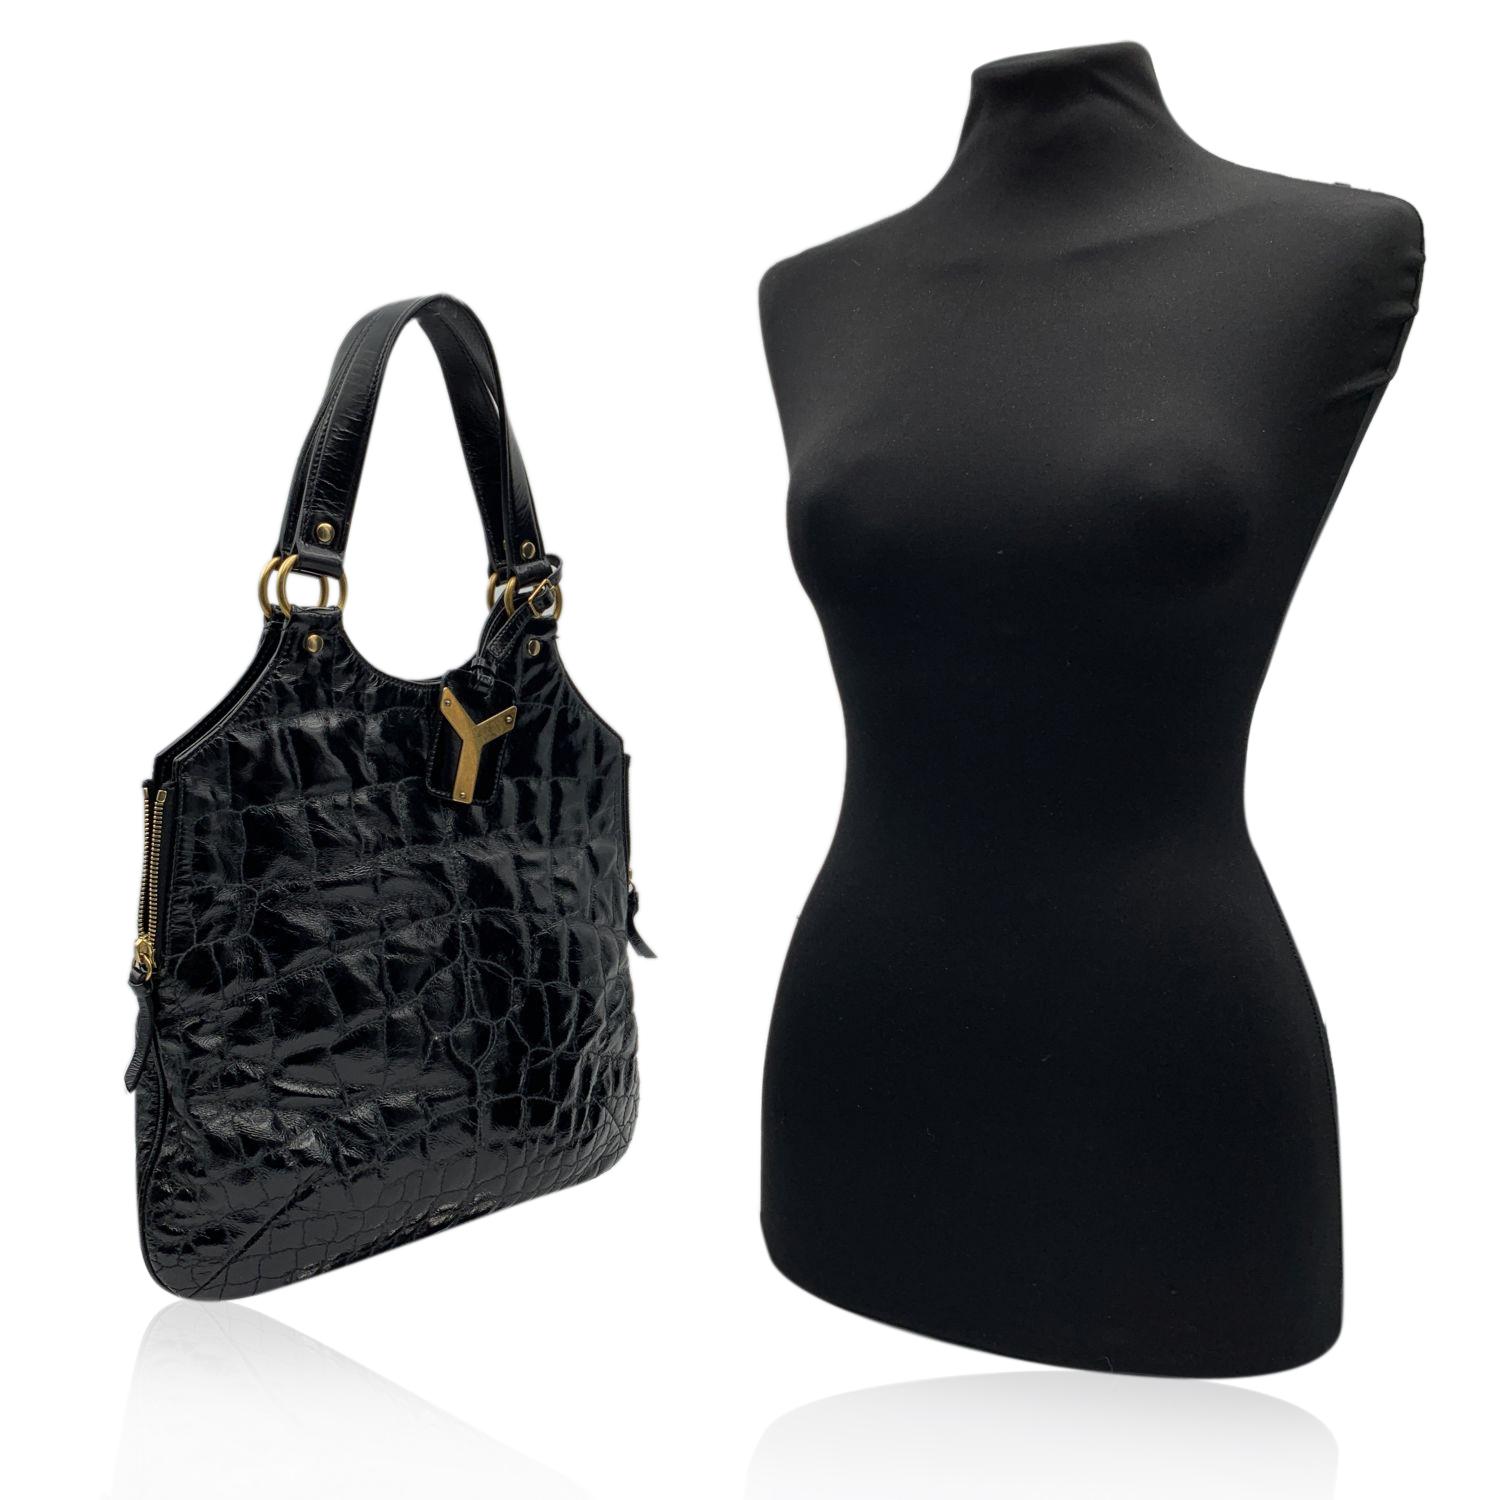 Yves Saint Laurent Black 'Metropolis Tribute Bag', crafted in black shiny leather with a quilted embossed croc-look. It features a sleek design in with side zip detailing , an ID tag and gold metal hardware. Magnetic button closure on top. Black